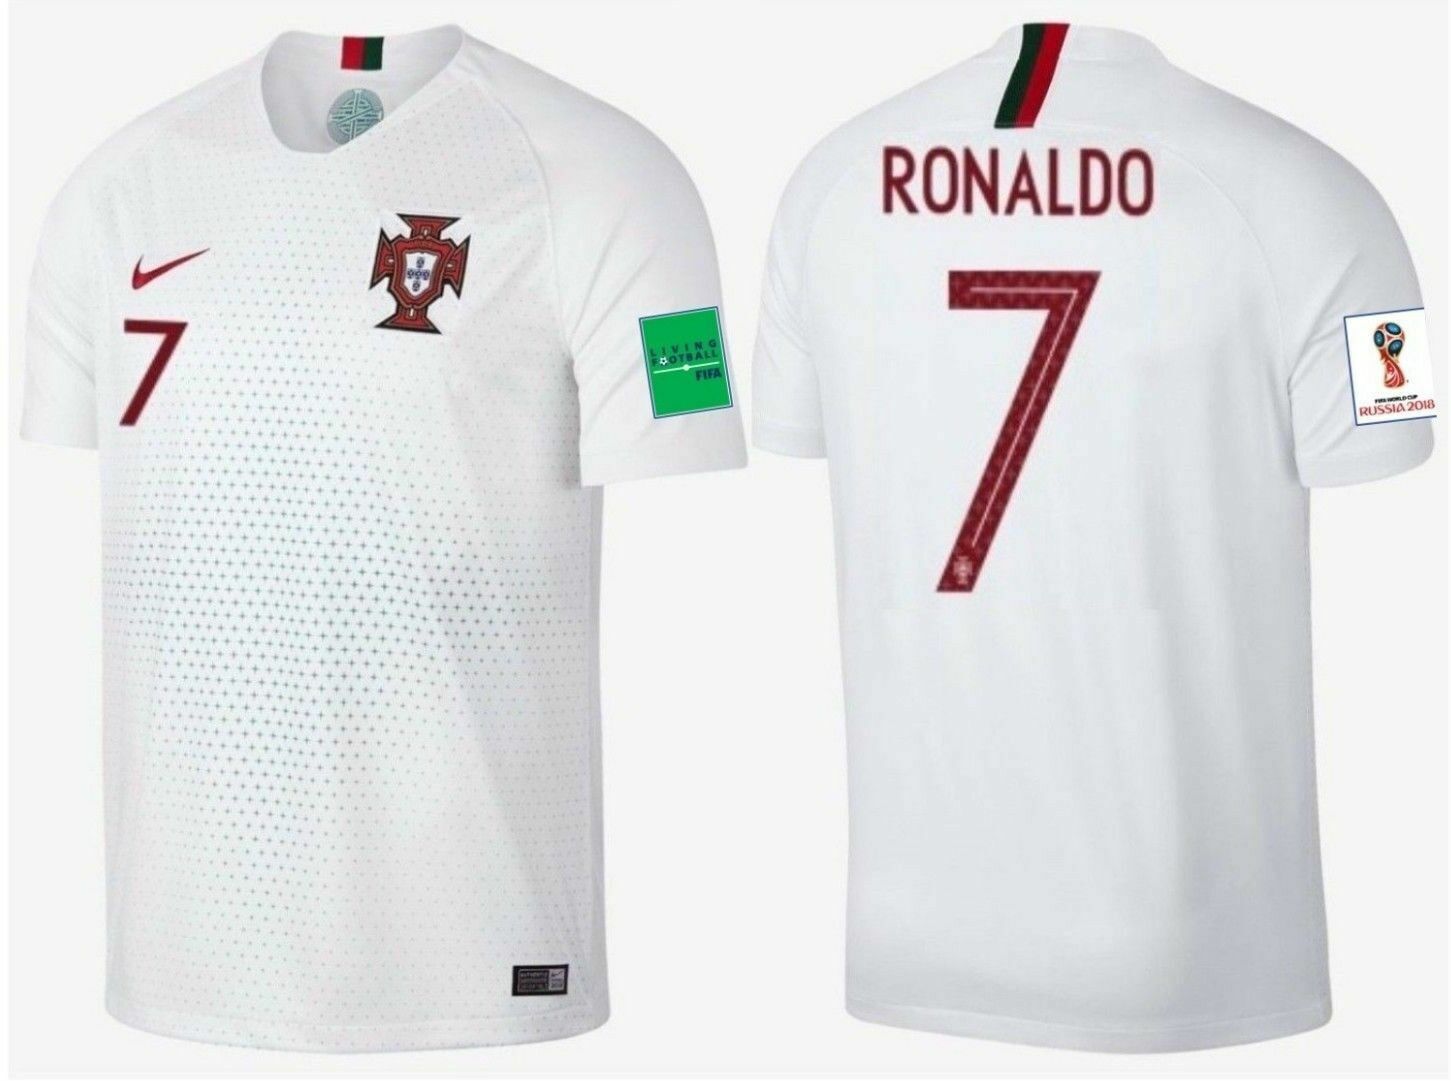 Egetræ Udover Relaterede NIKE CRISTIANO RONALDO PORTUGAL AWAY JERSEY FIFA WORLD CUP 2018 | eBay